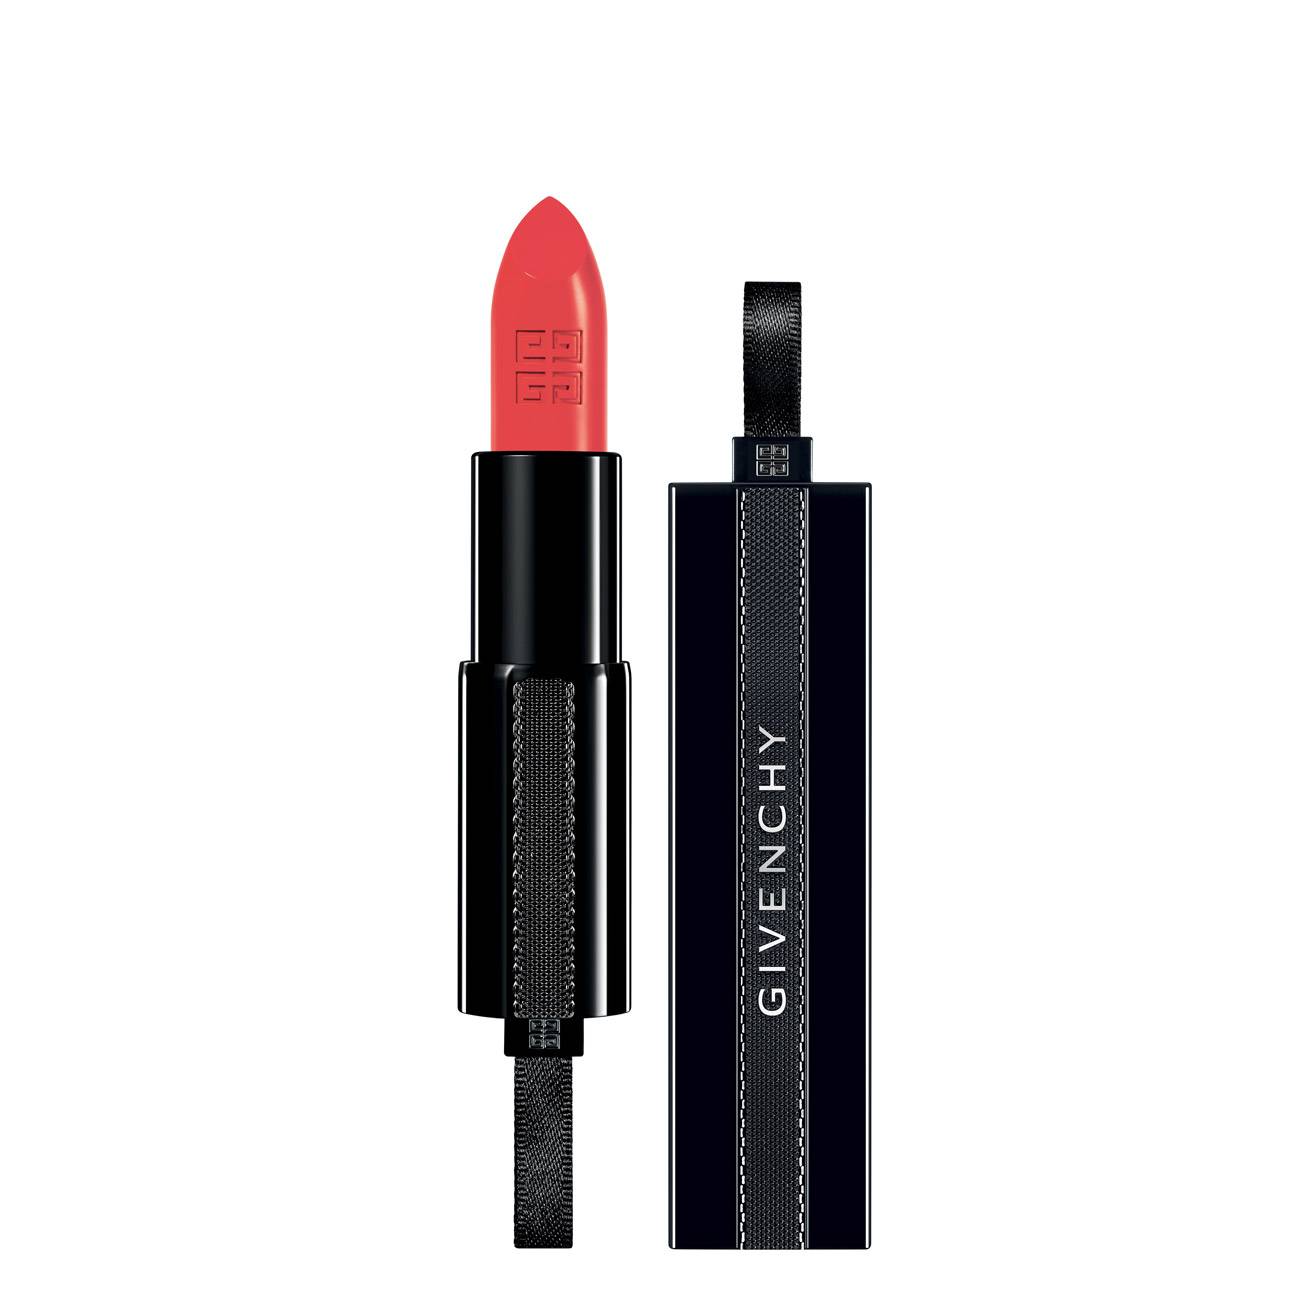 Ruj Givenchy ROUGE INTERDIT 02 3.4 G WANTED CORAL 16 cu comanda online